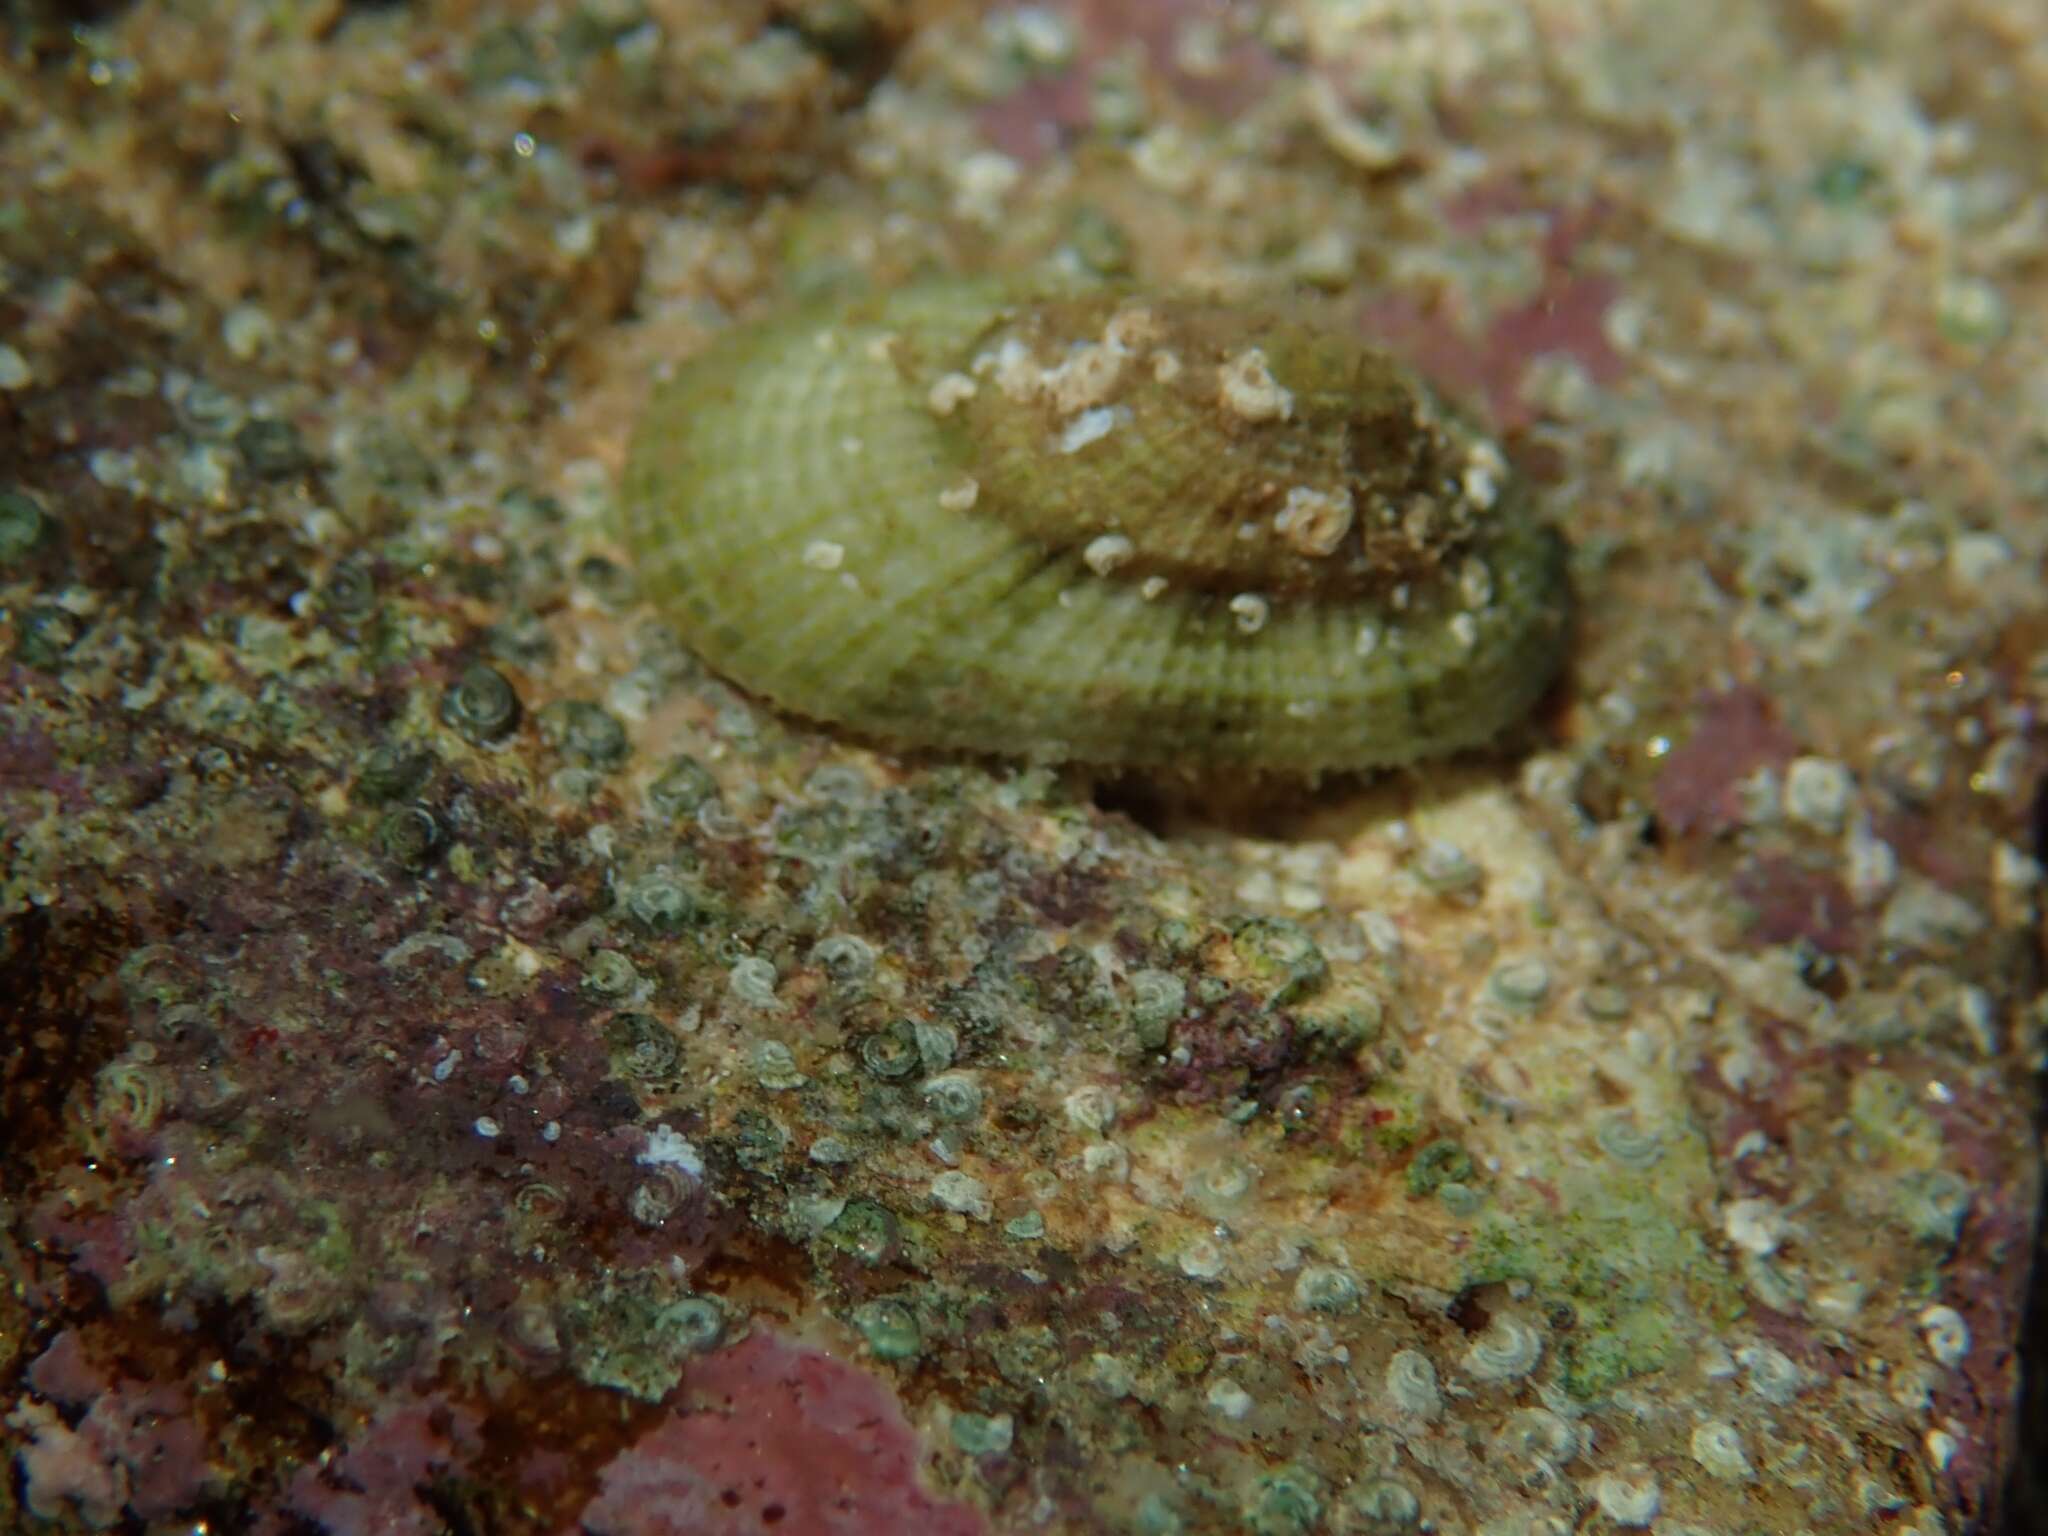 Image of humped keyhole limpet